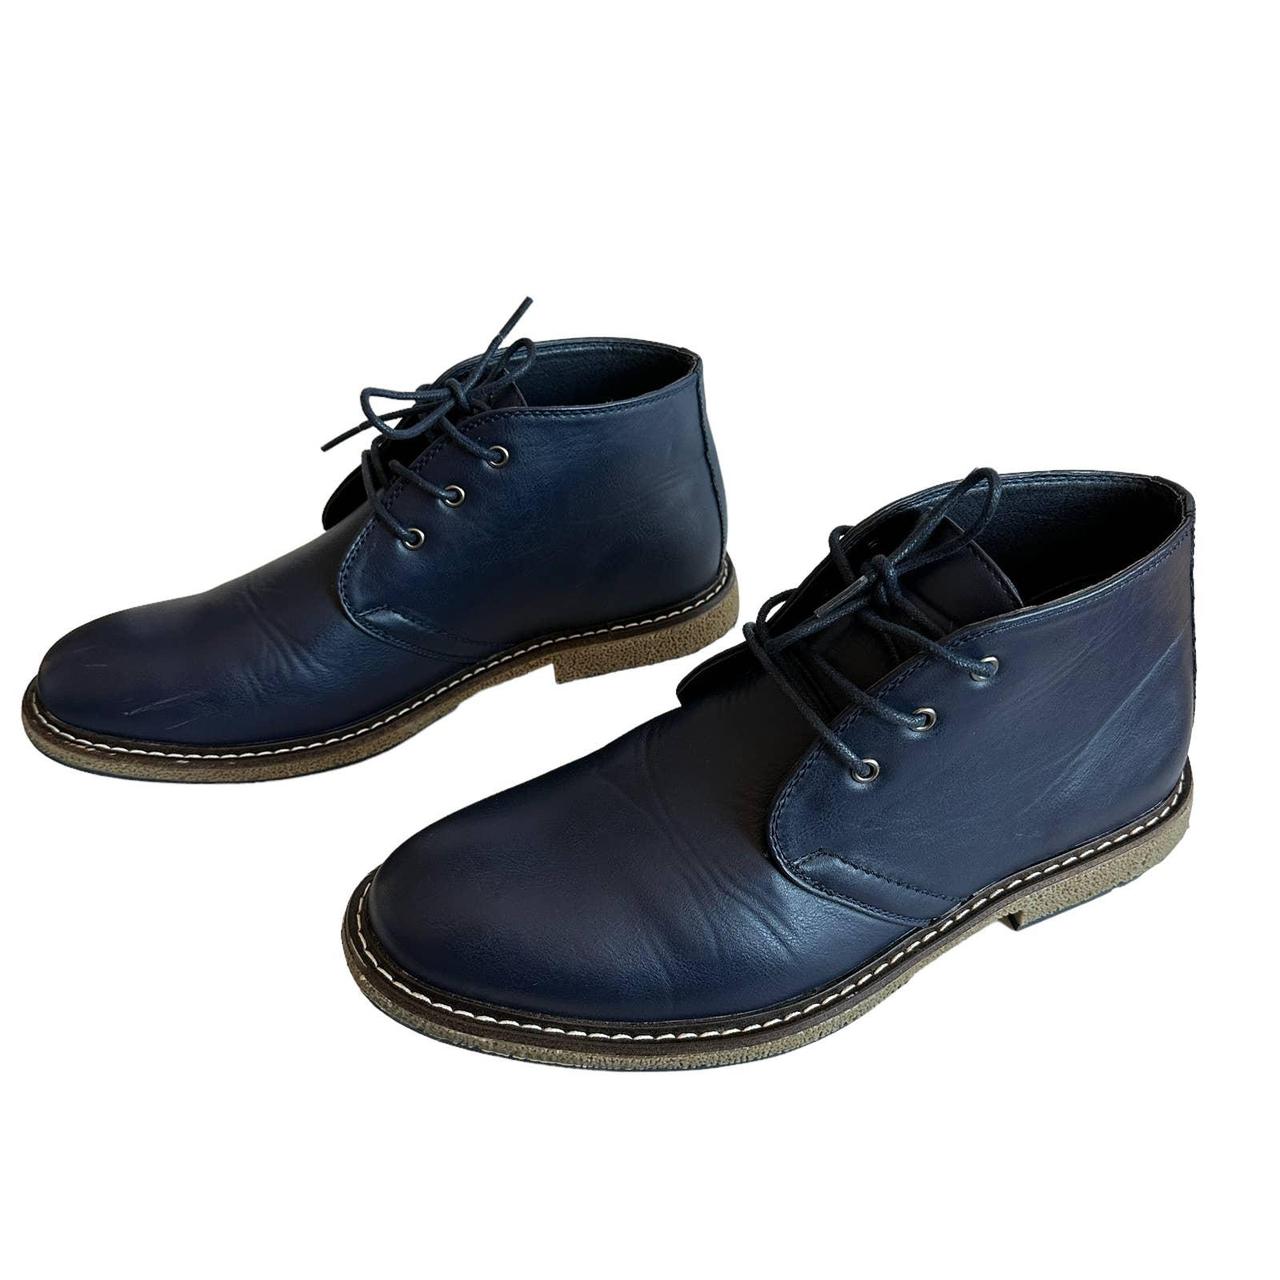 Hawke & Co. Men's Blue and White Boots | Depop